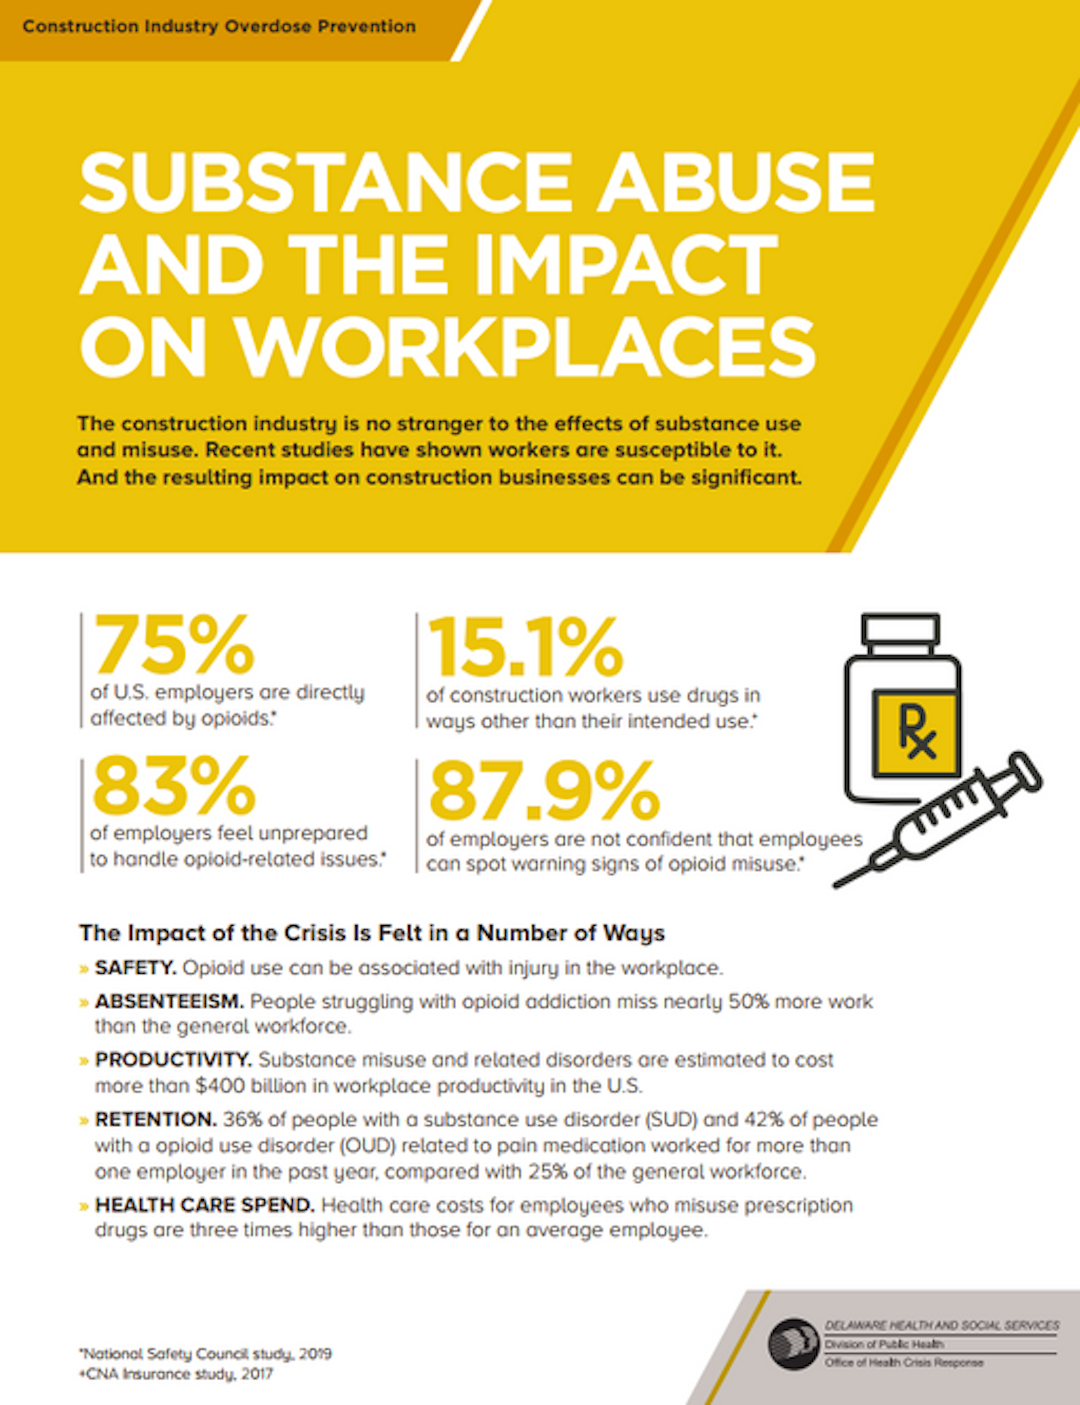 Information About Substance Abuse and How Workplaces Are Impacted